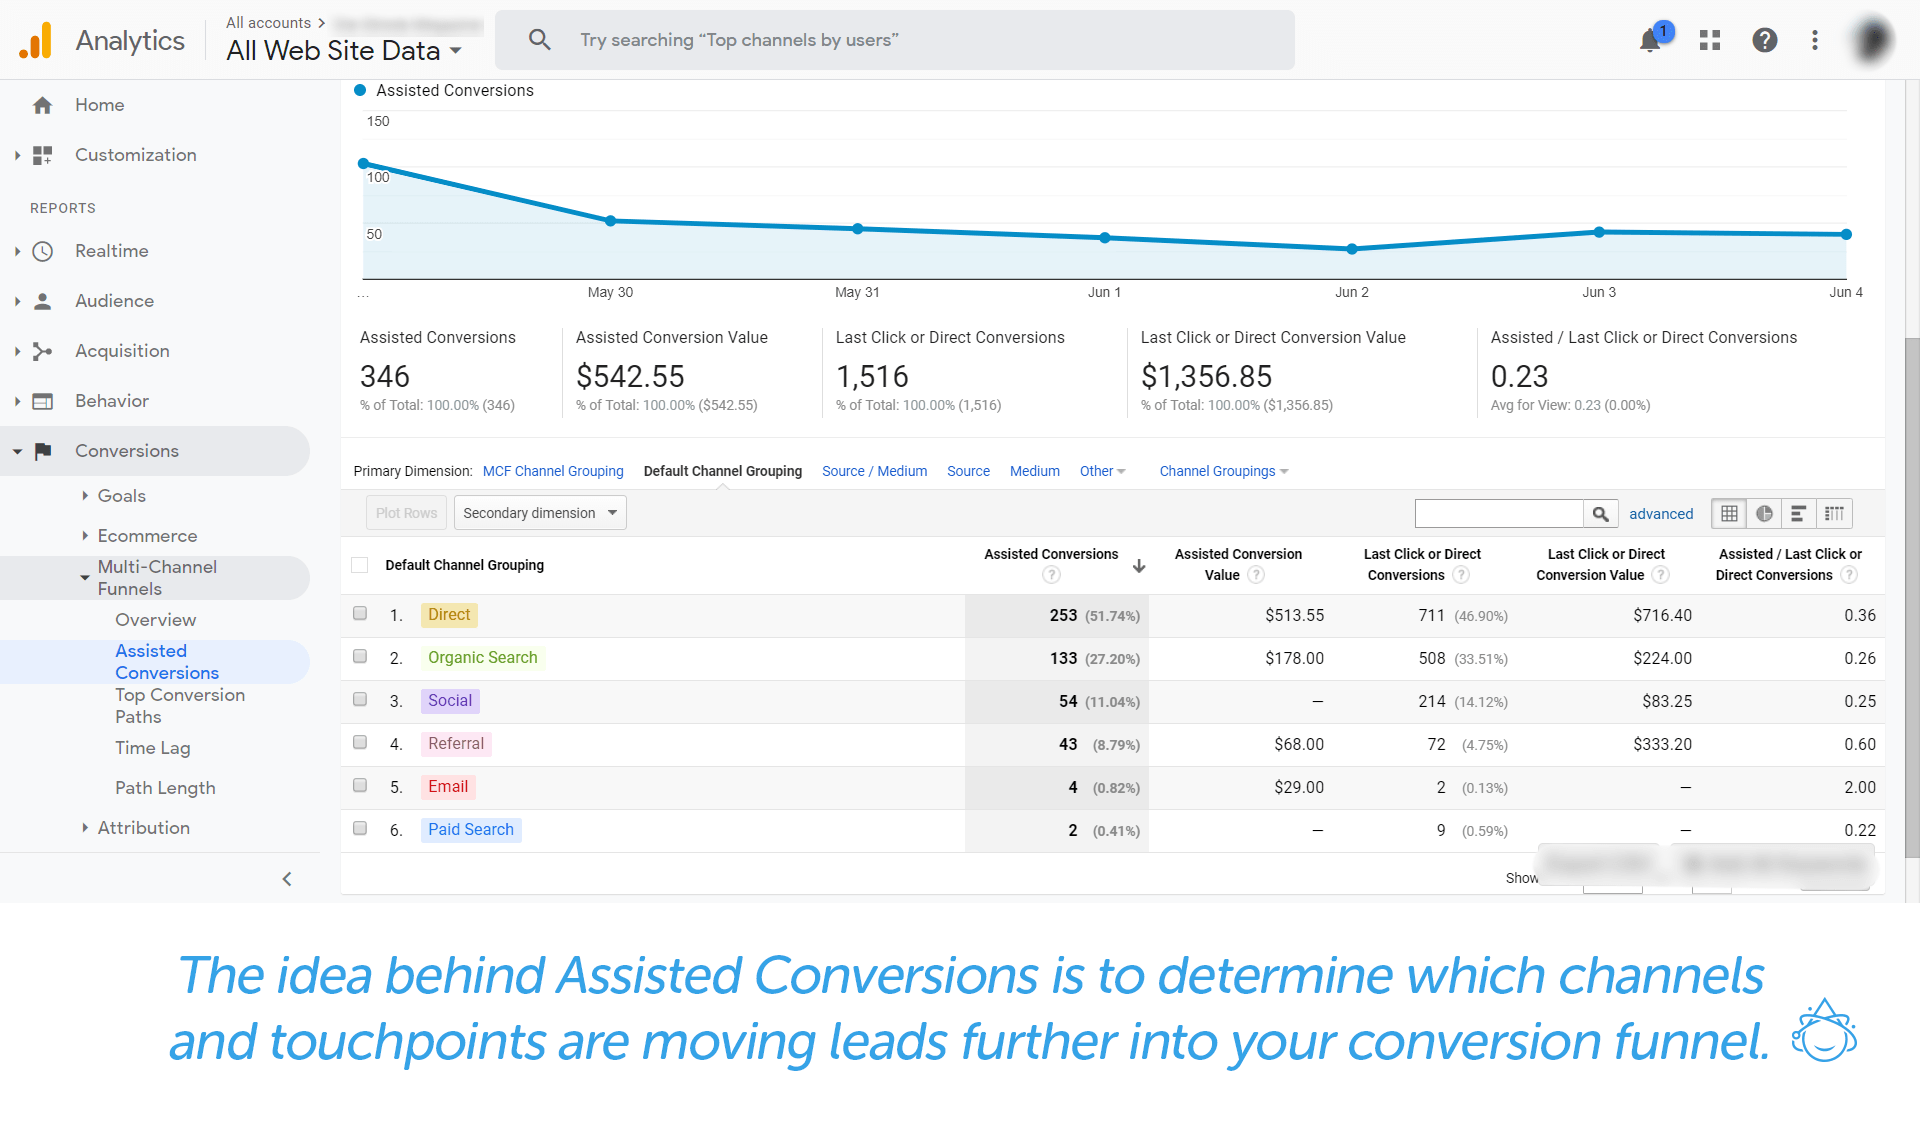 The idea behind Assisted Conversions is to determine which channels and touchpoints are moving leads further into your conversion funnel.